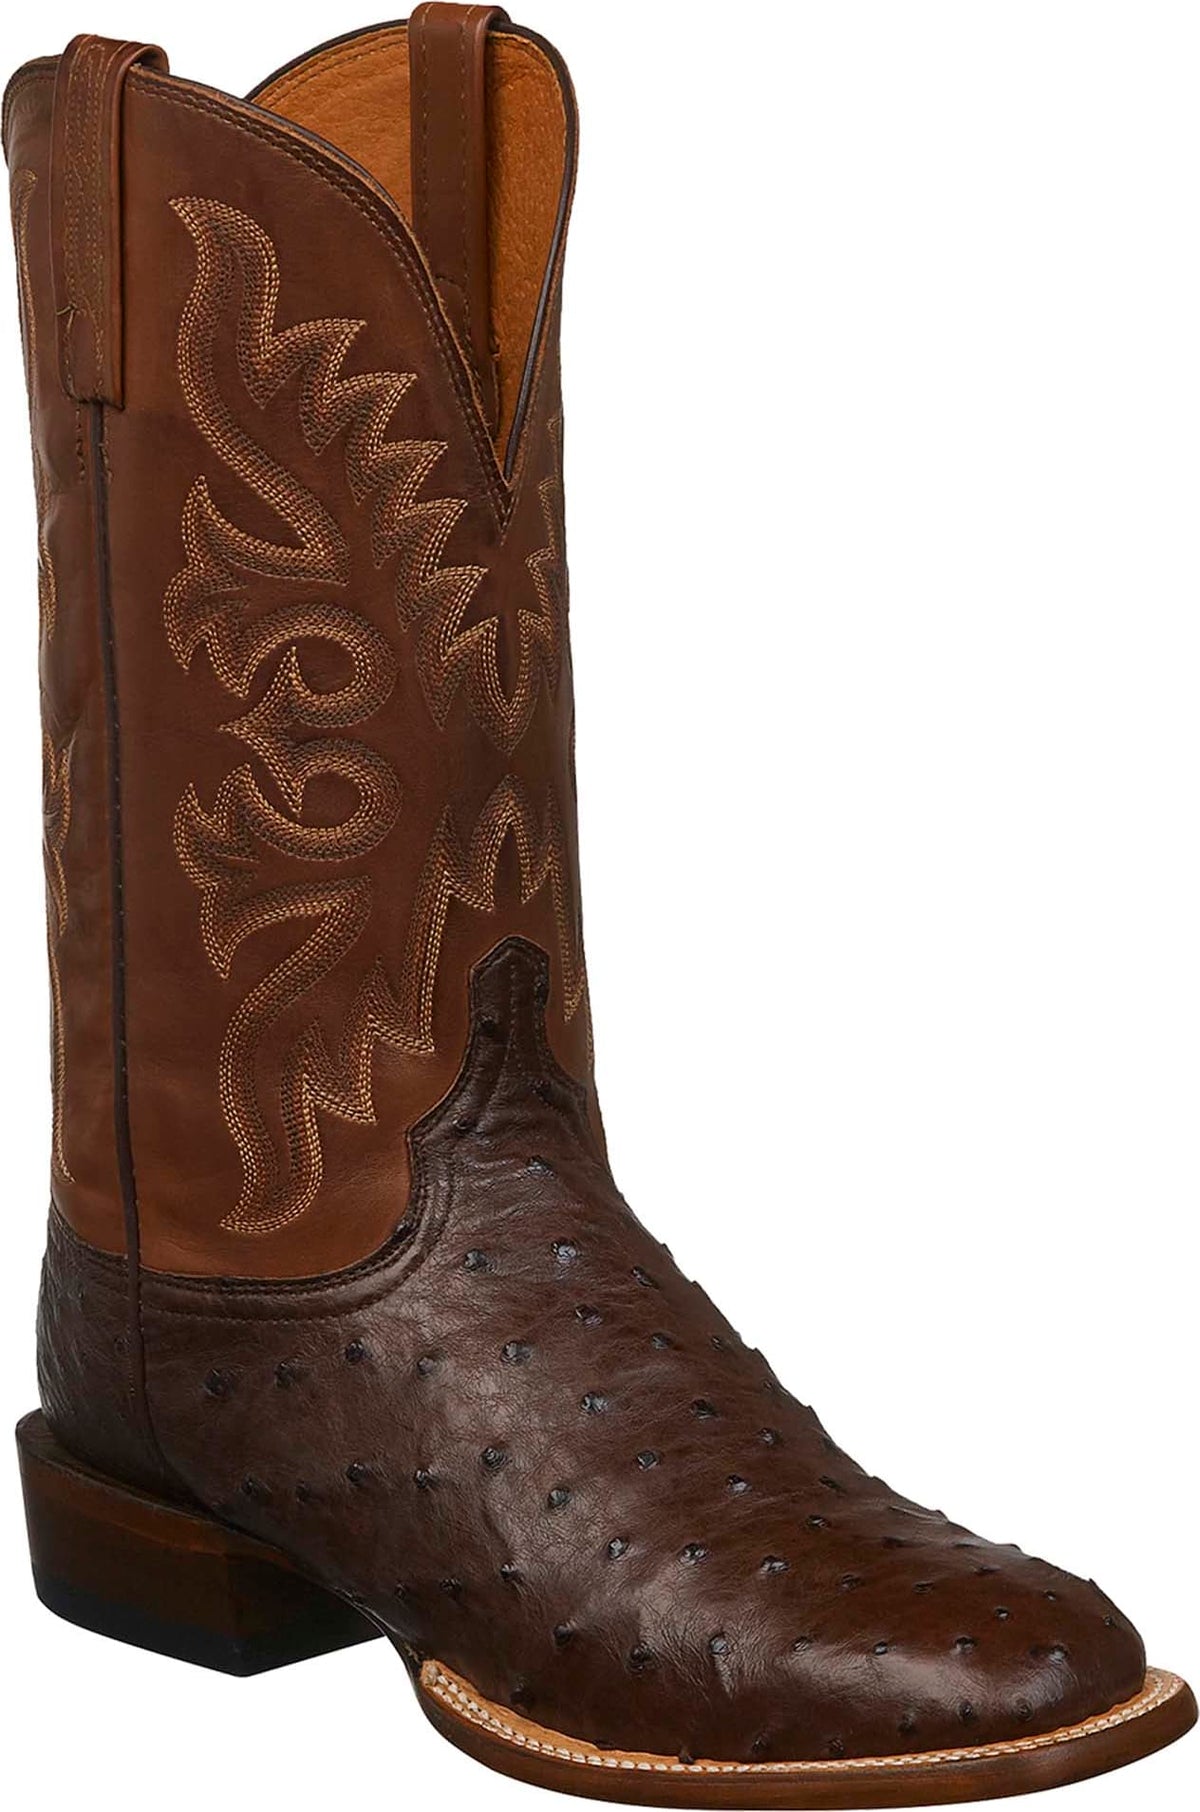 MEN’S LUCCHESE HARMON - SIENNA FULL QUILL OSTRICH BOOTS - El Toro Boots